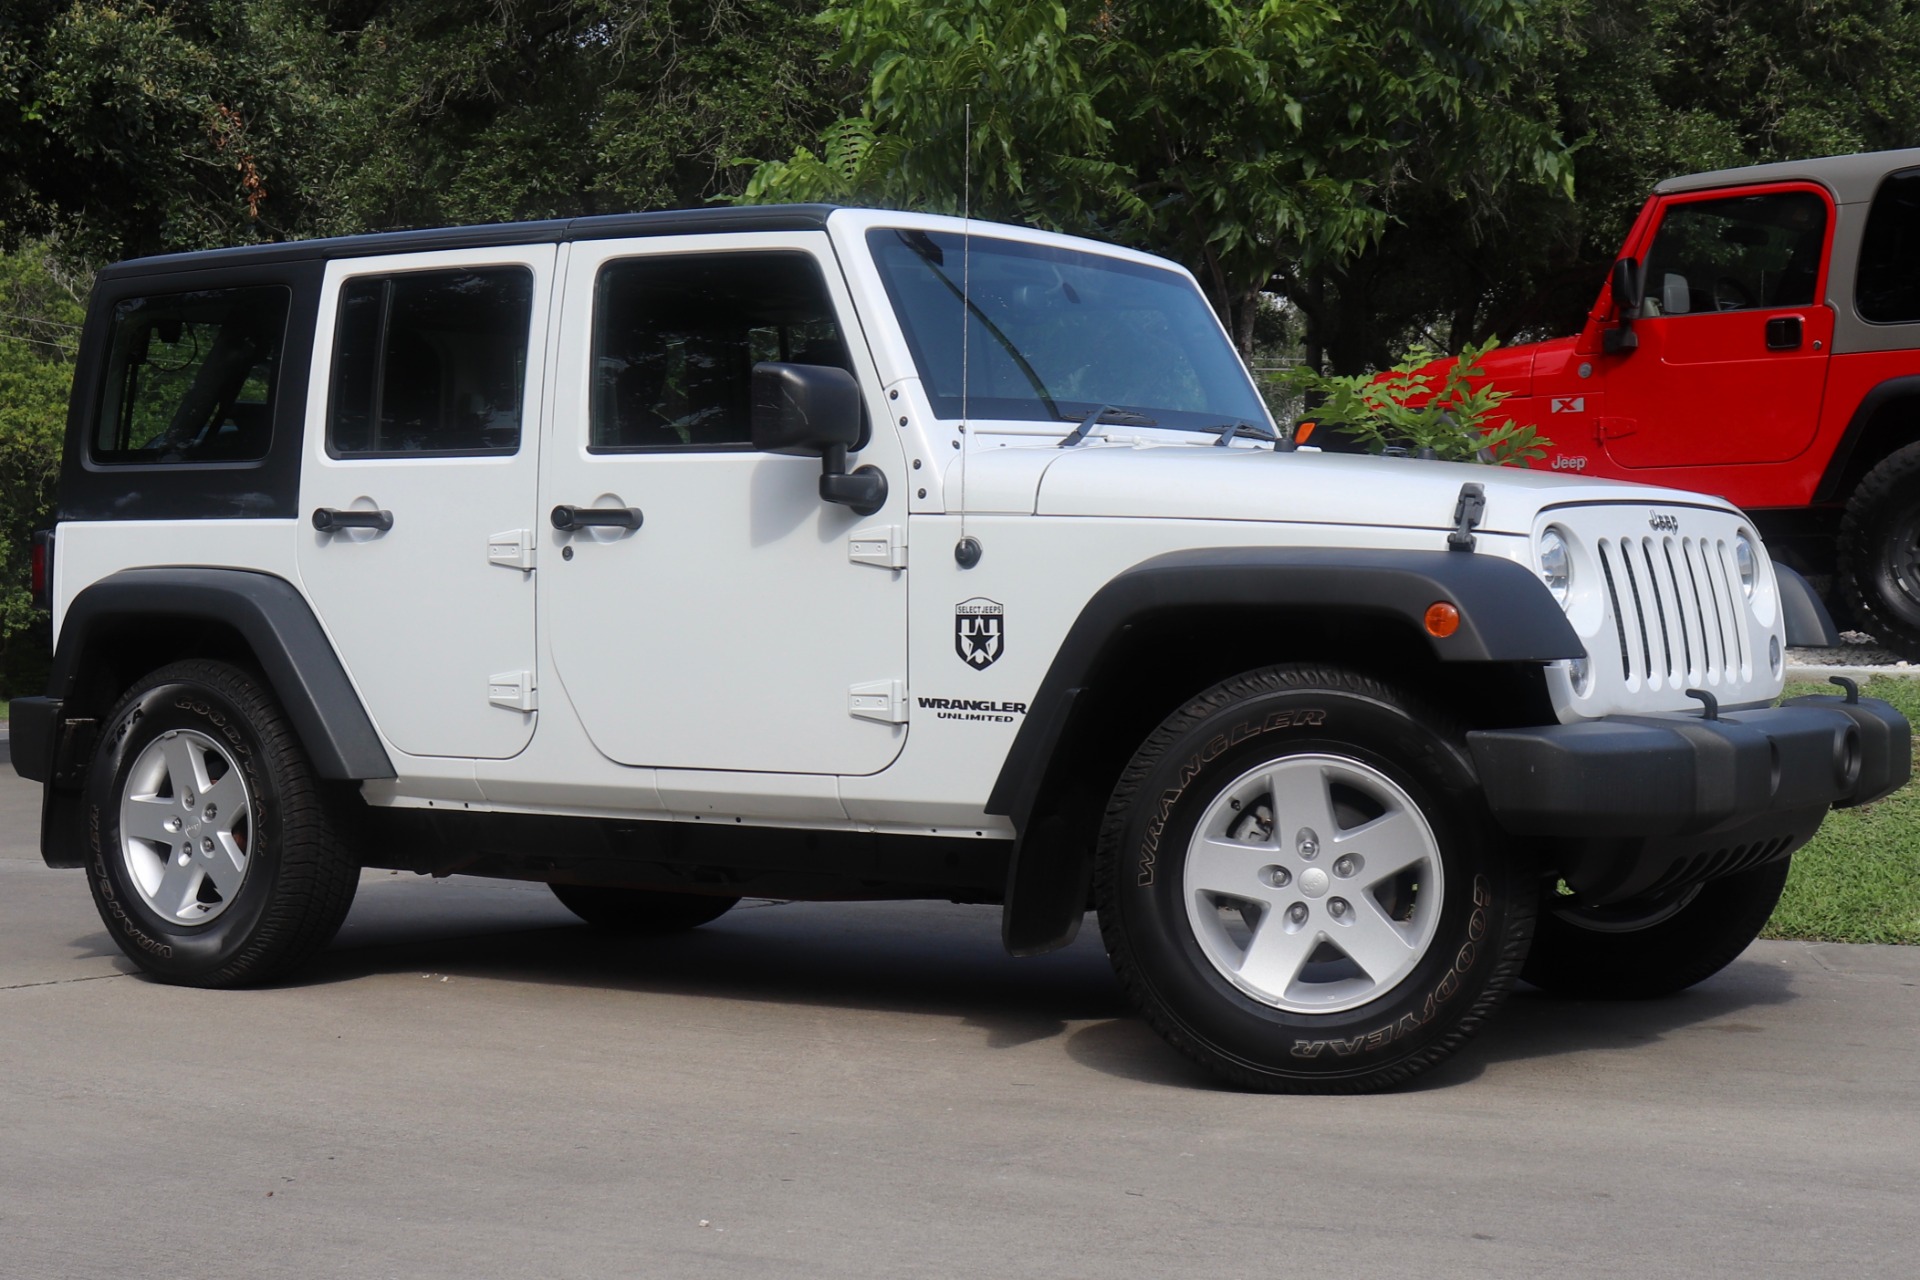 Used 2015 Jeep Wrangler Unlimited Sport RHD For Sale ($28,995) | Select  Jeeps Inc. Stock #679559